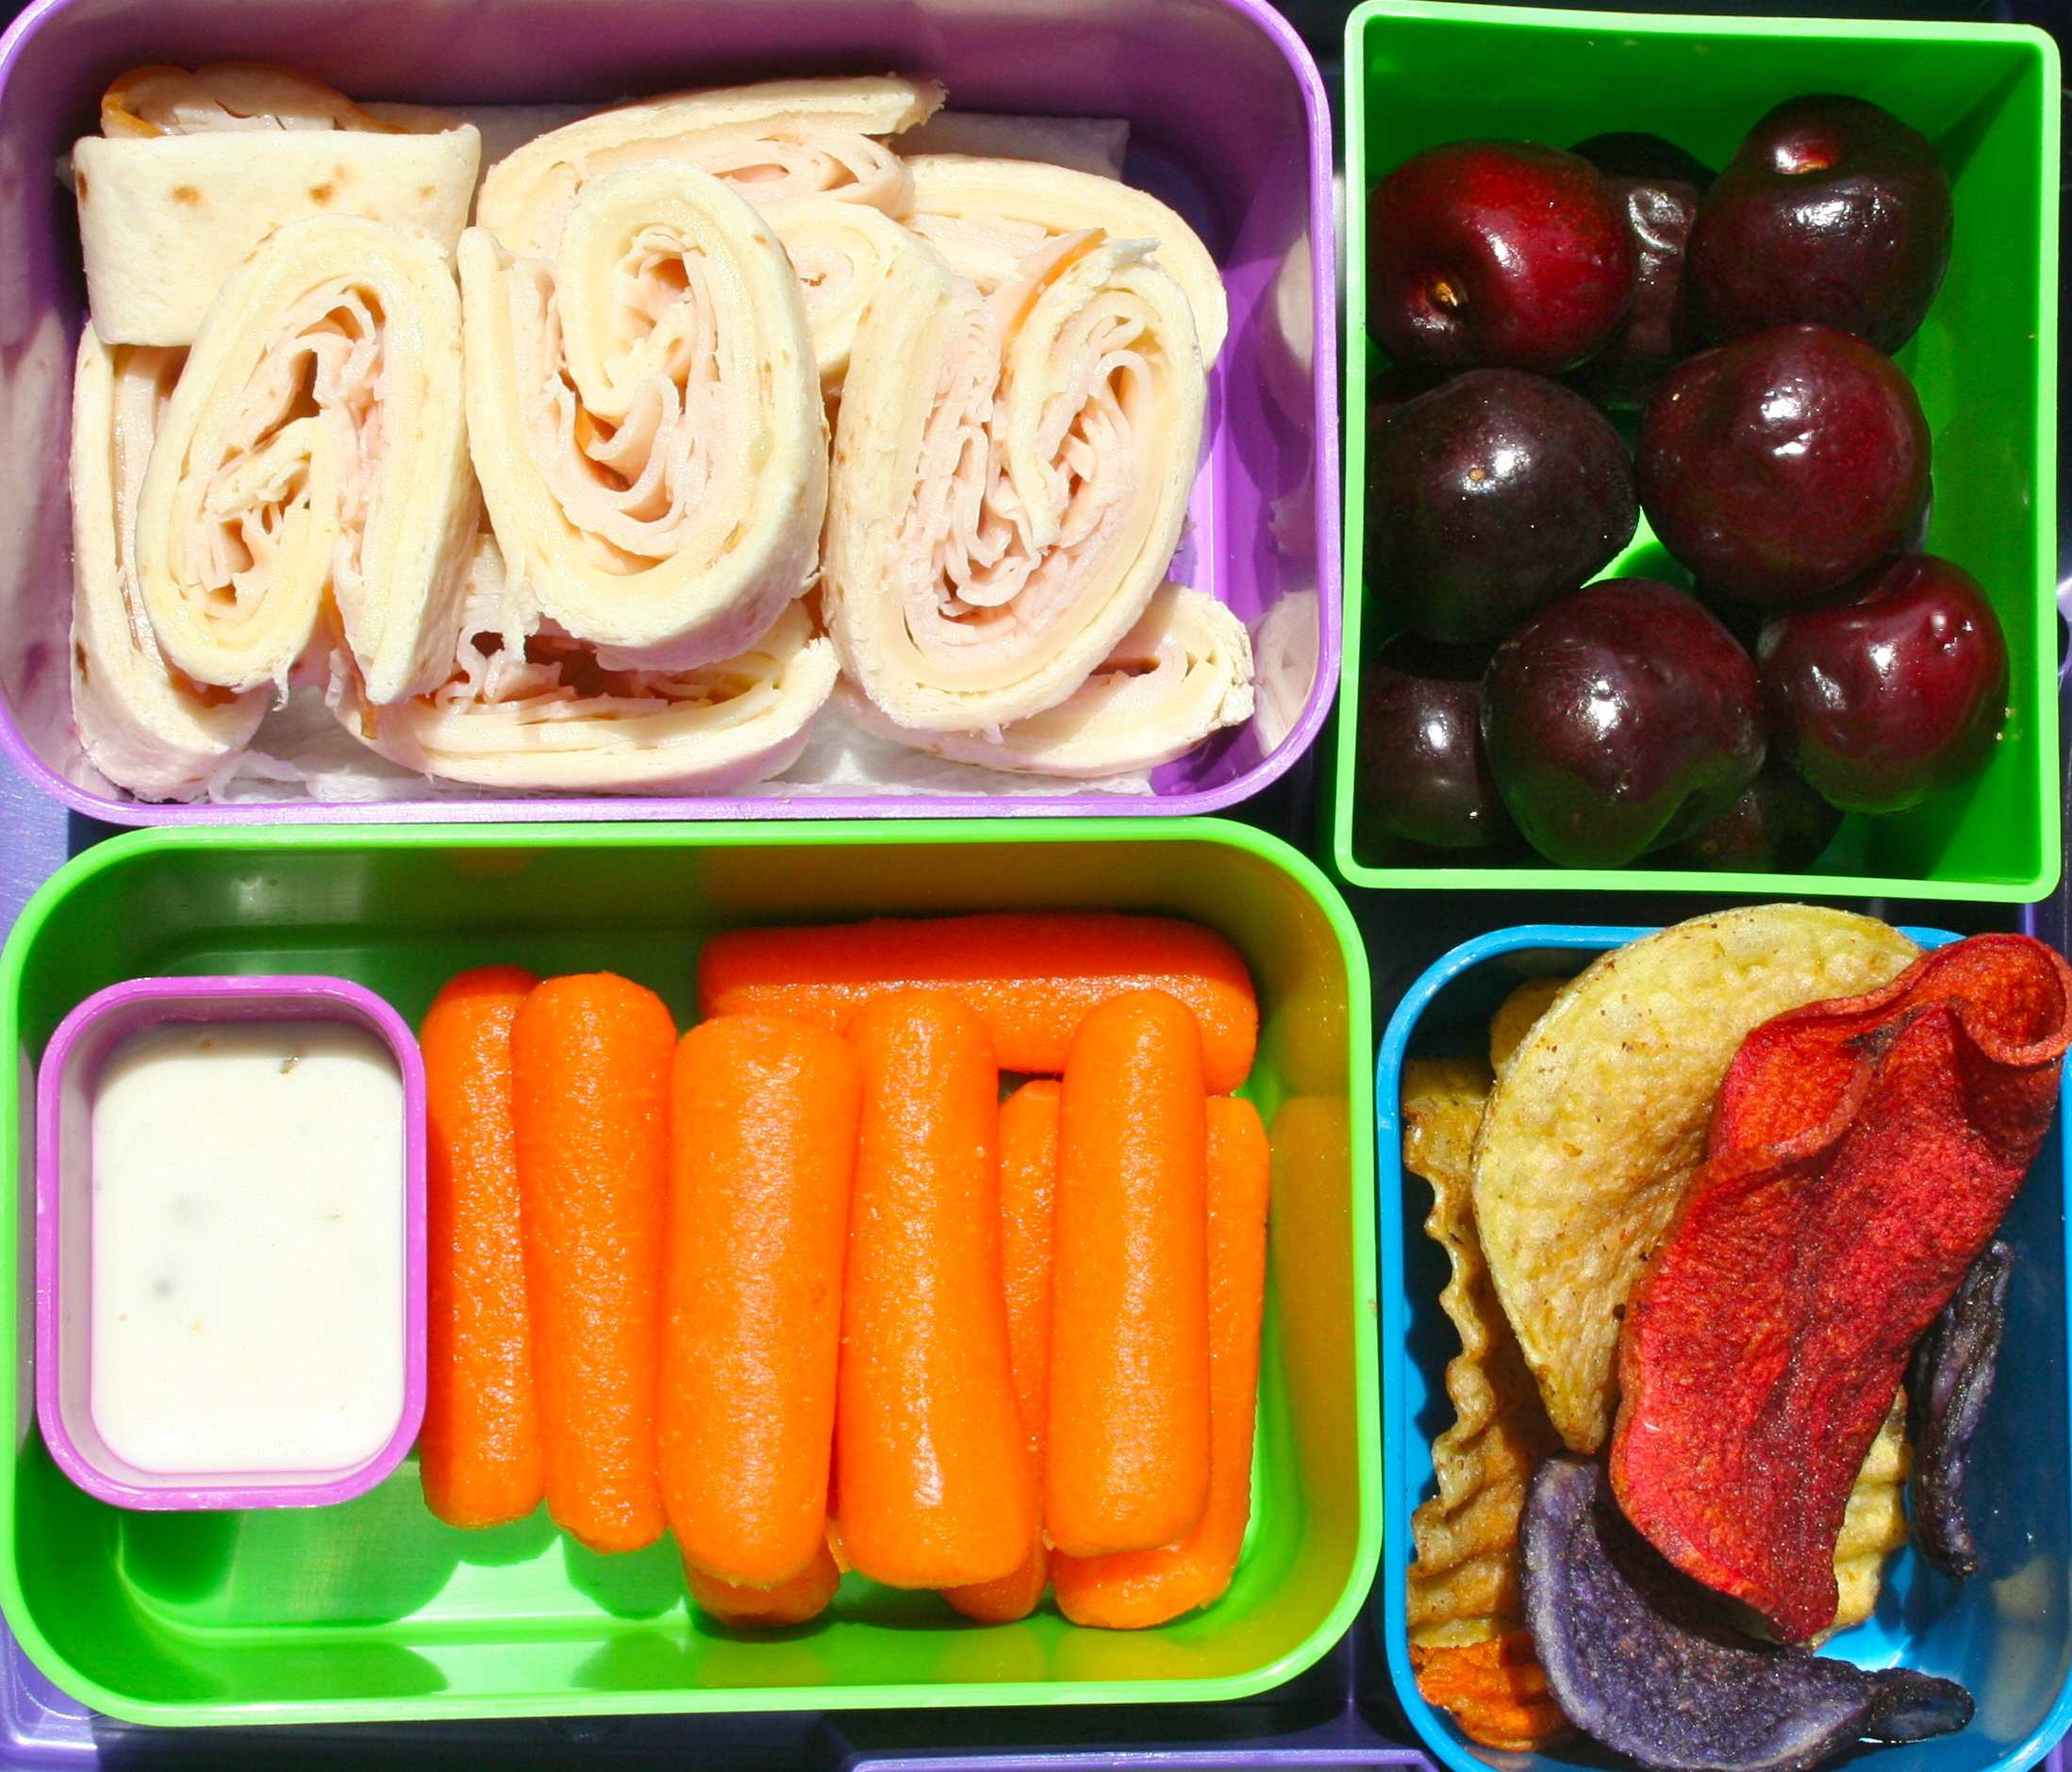 Healthy School Lunches
 Getting Back to School How to Pack Fresh Lunches